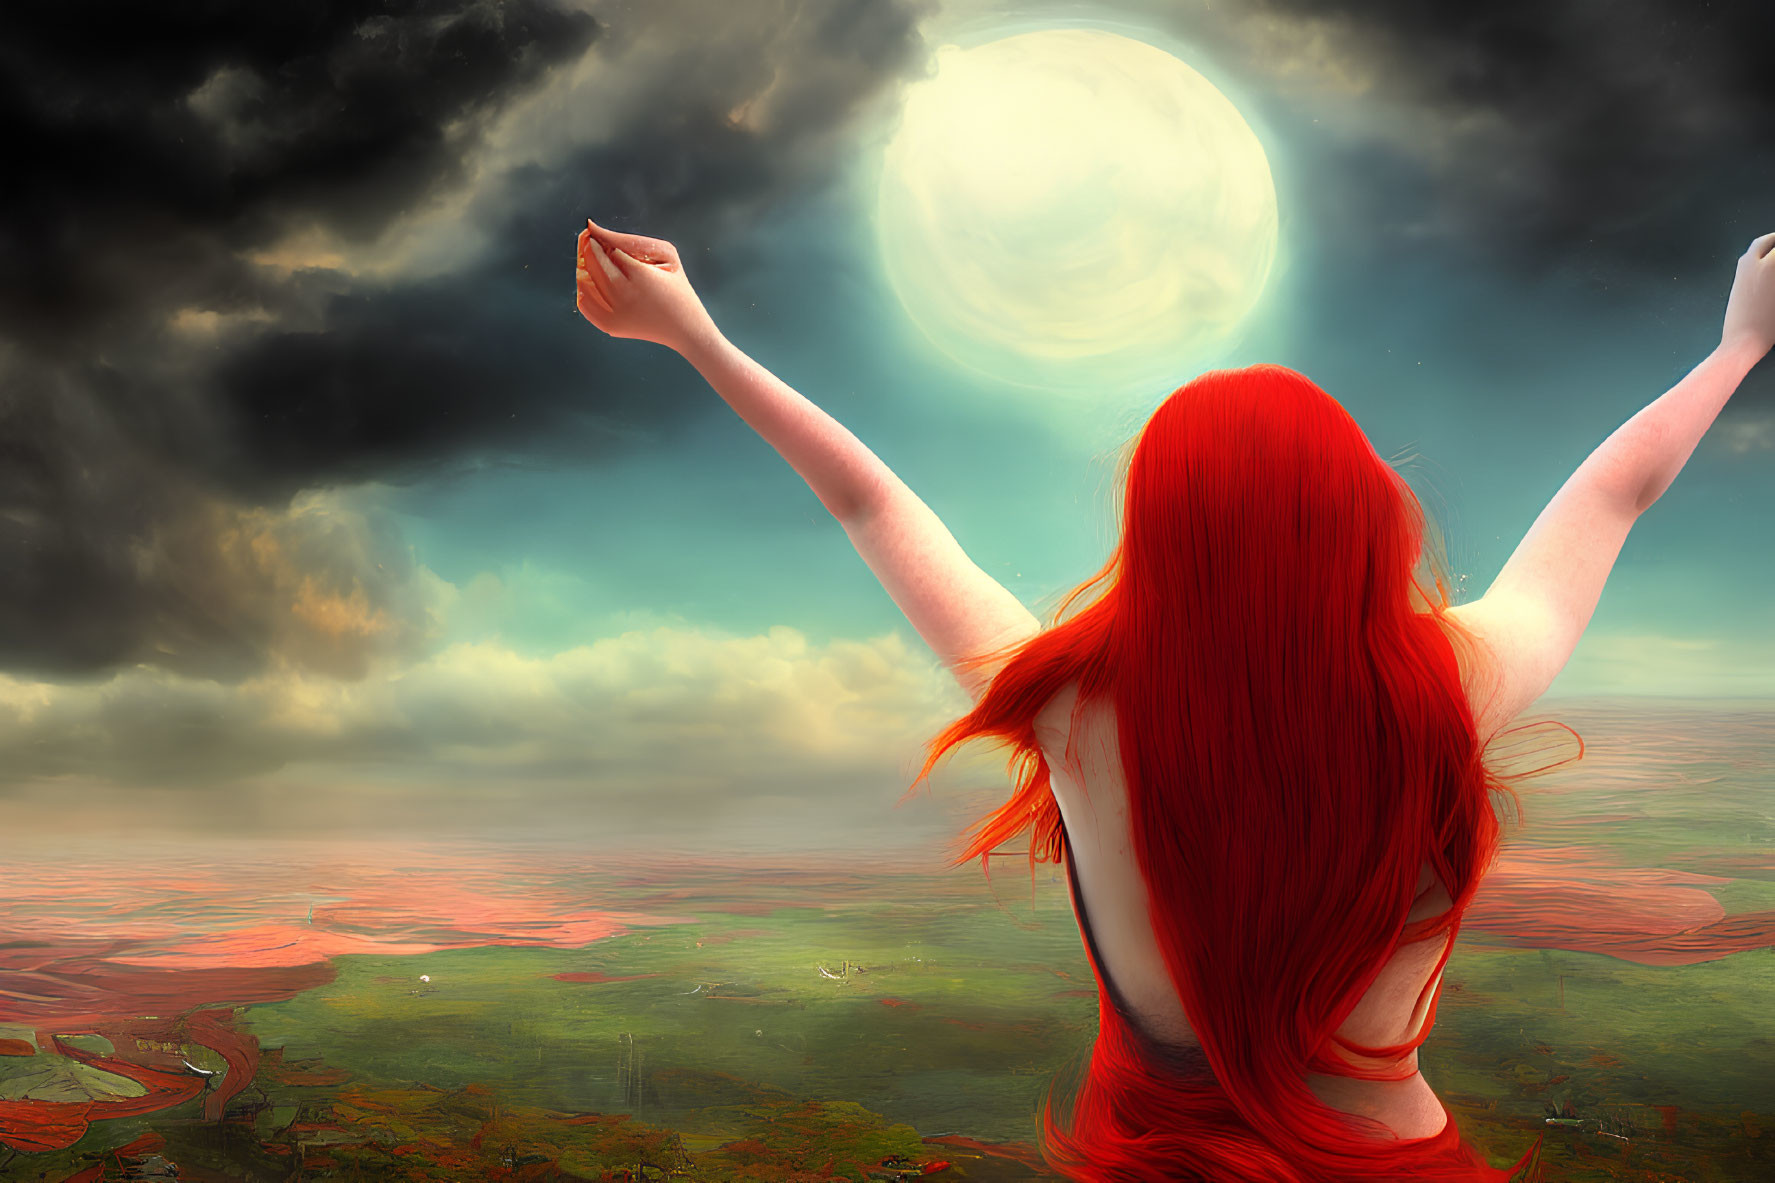 Vibrant red-haired person under stormy sky with bright moon in dramatic landscape